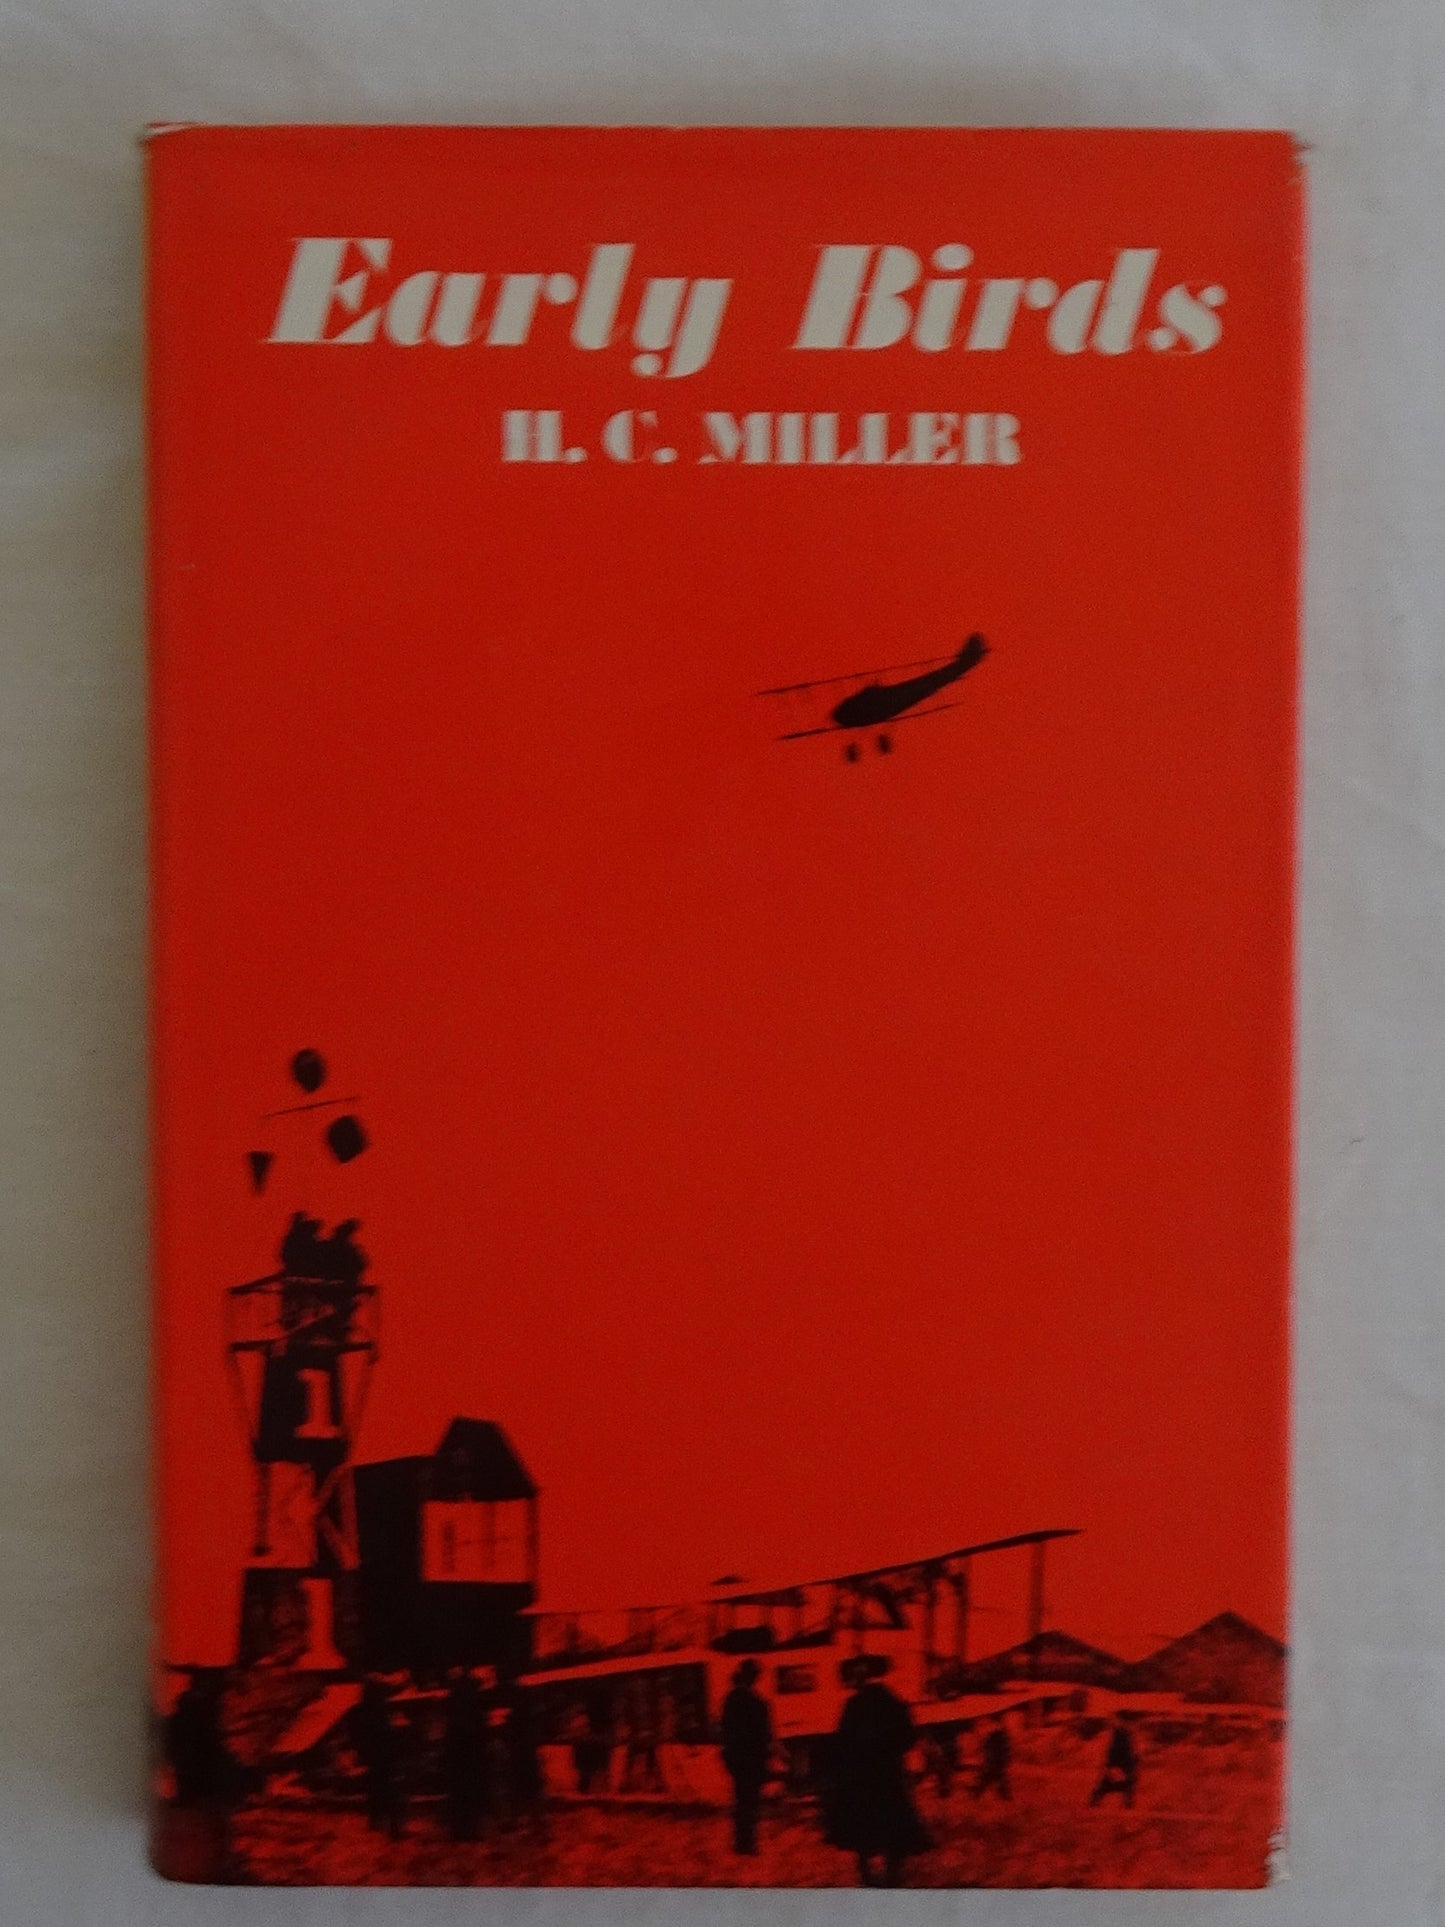 Early Birds by H. C. Miller